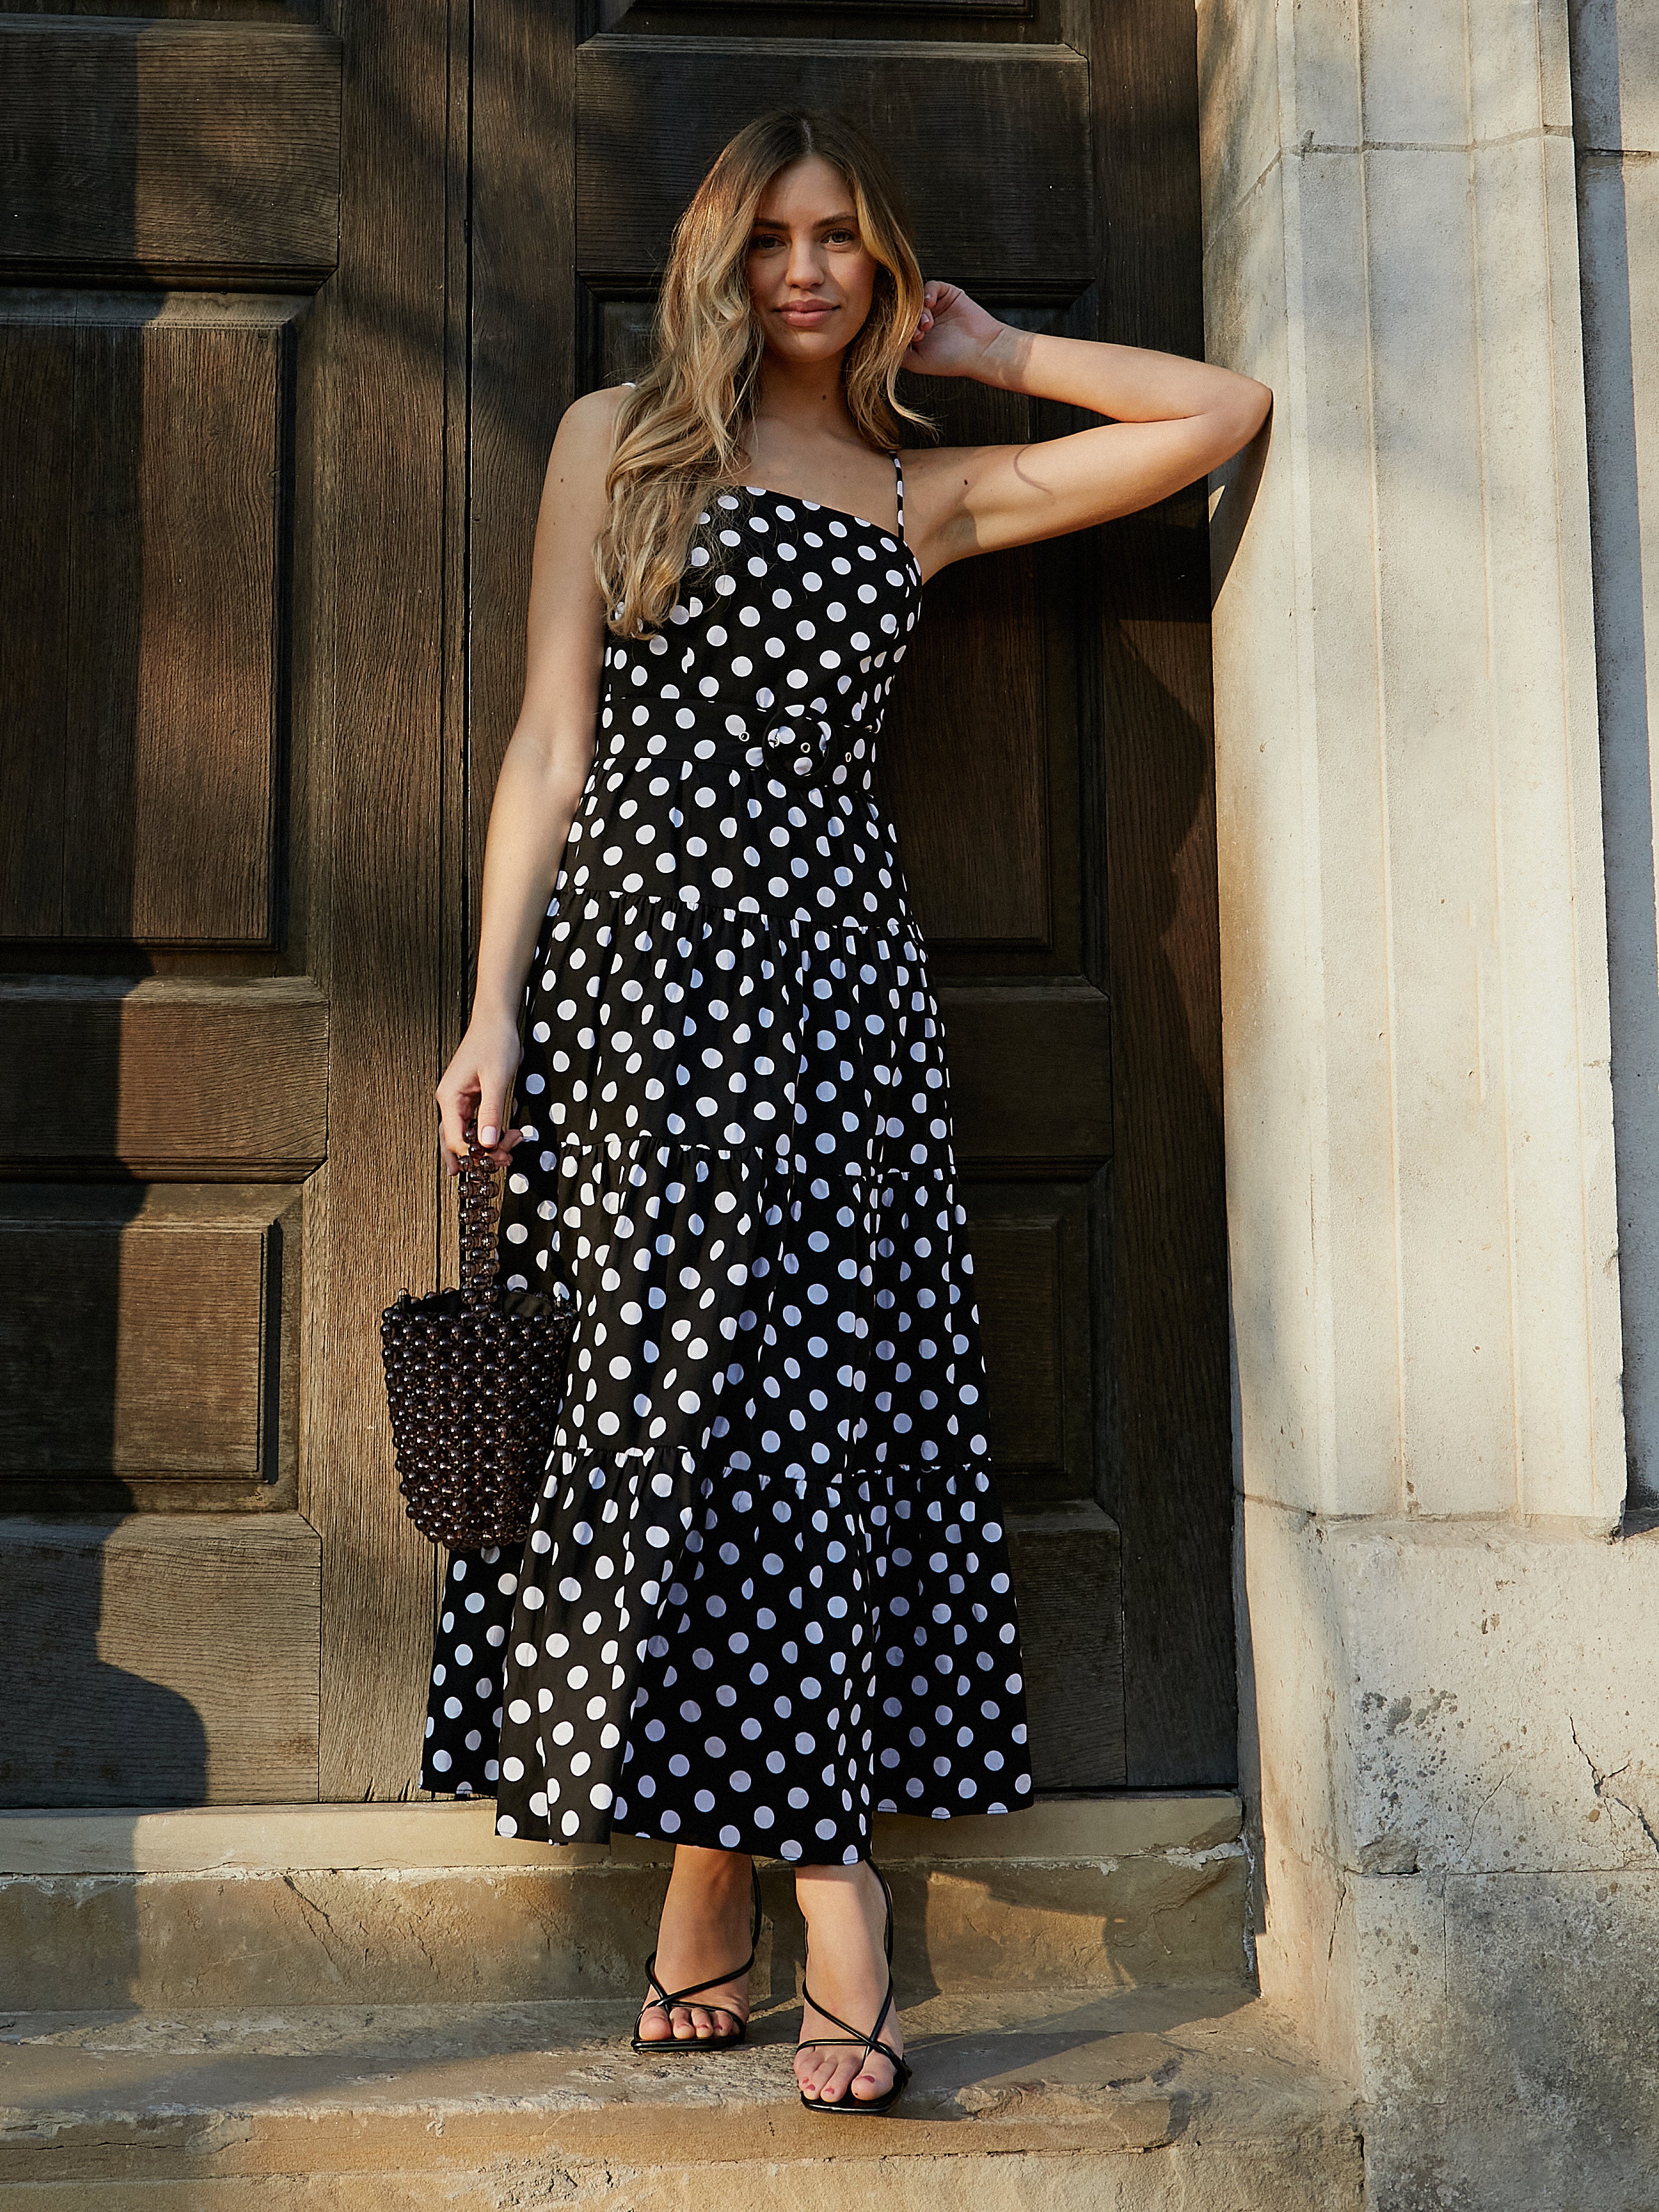 Polka Dot and Spotted Dresses